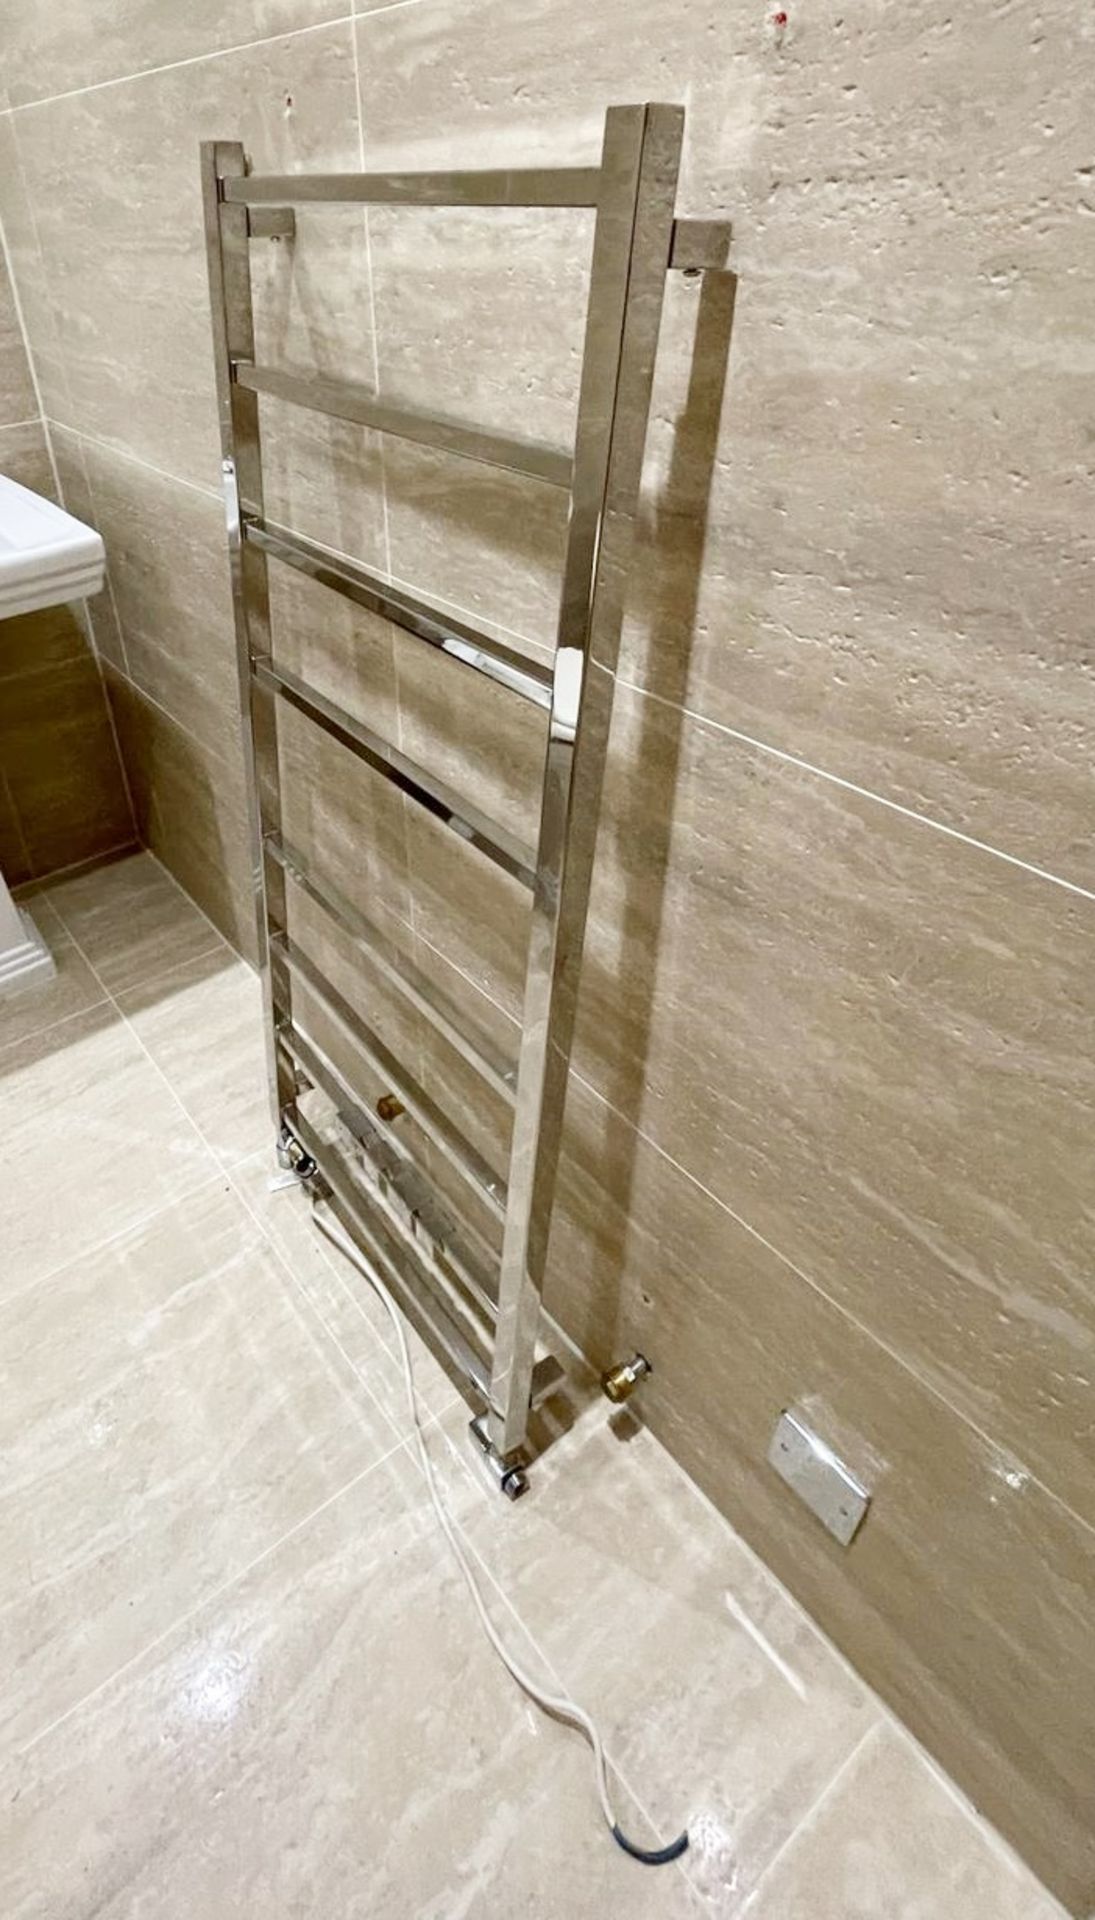 1 x Premium Towel Radiator in Chrome - Ref: FRNT/BD - CL896 - NO VAT ON THE HAMMER - Location: - Image 3 of 3